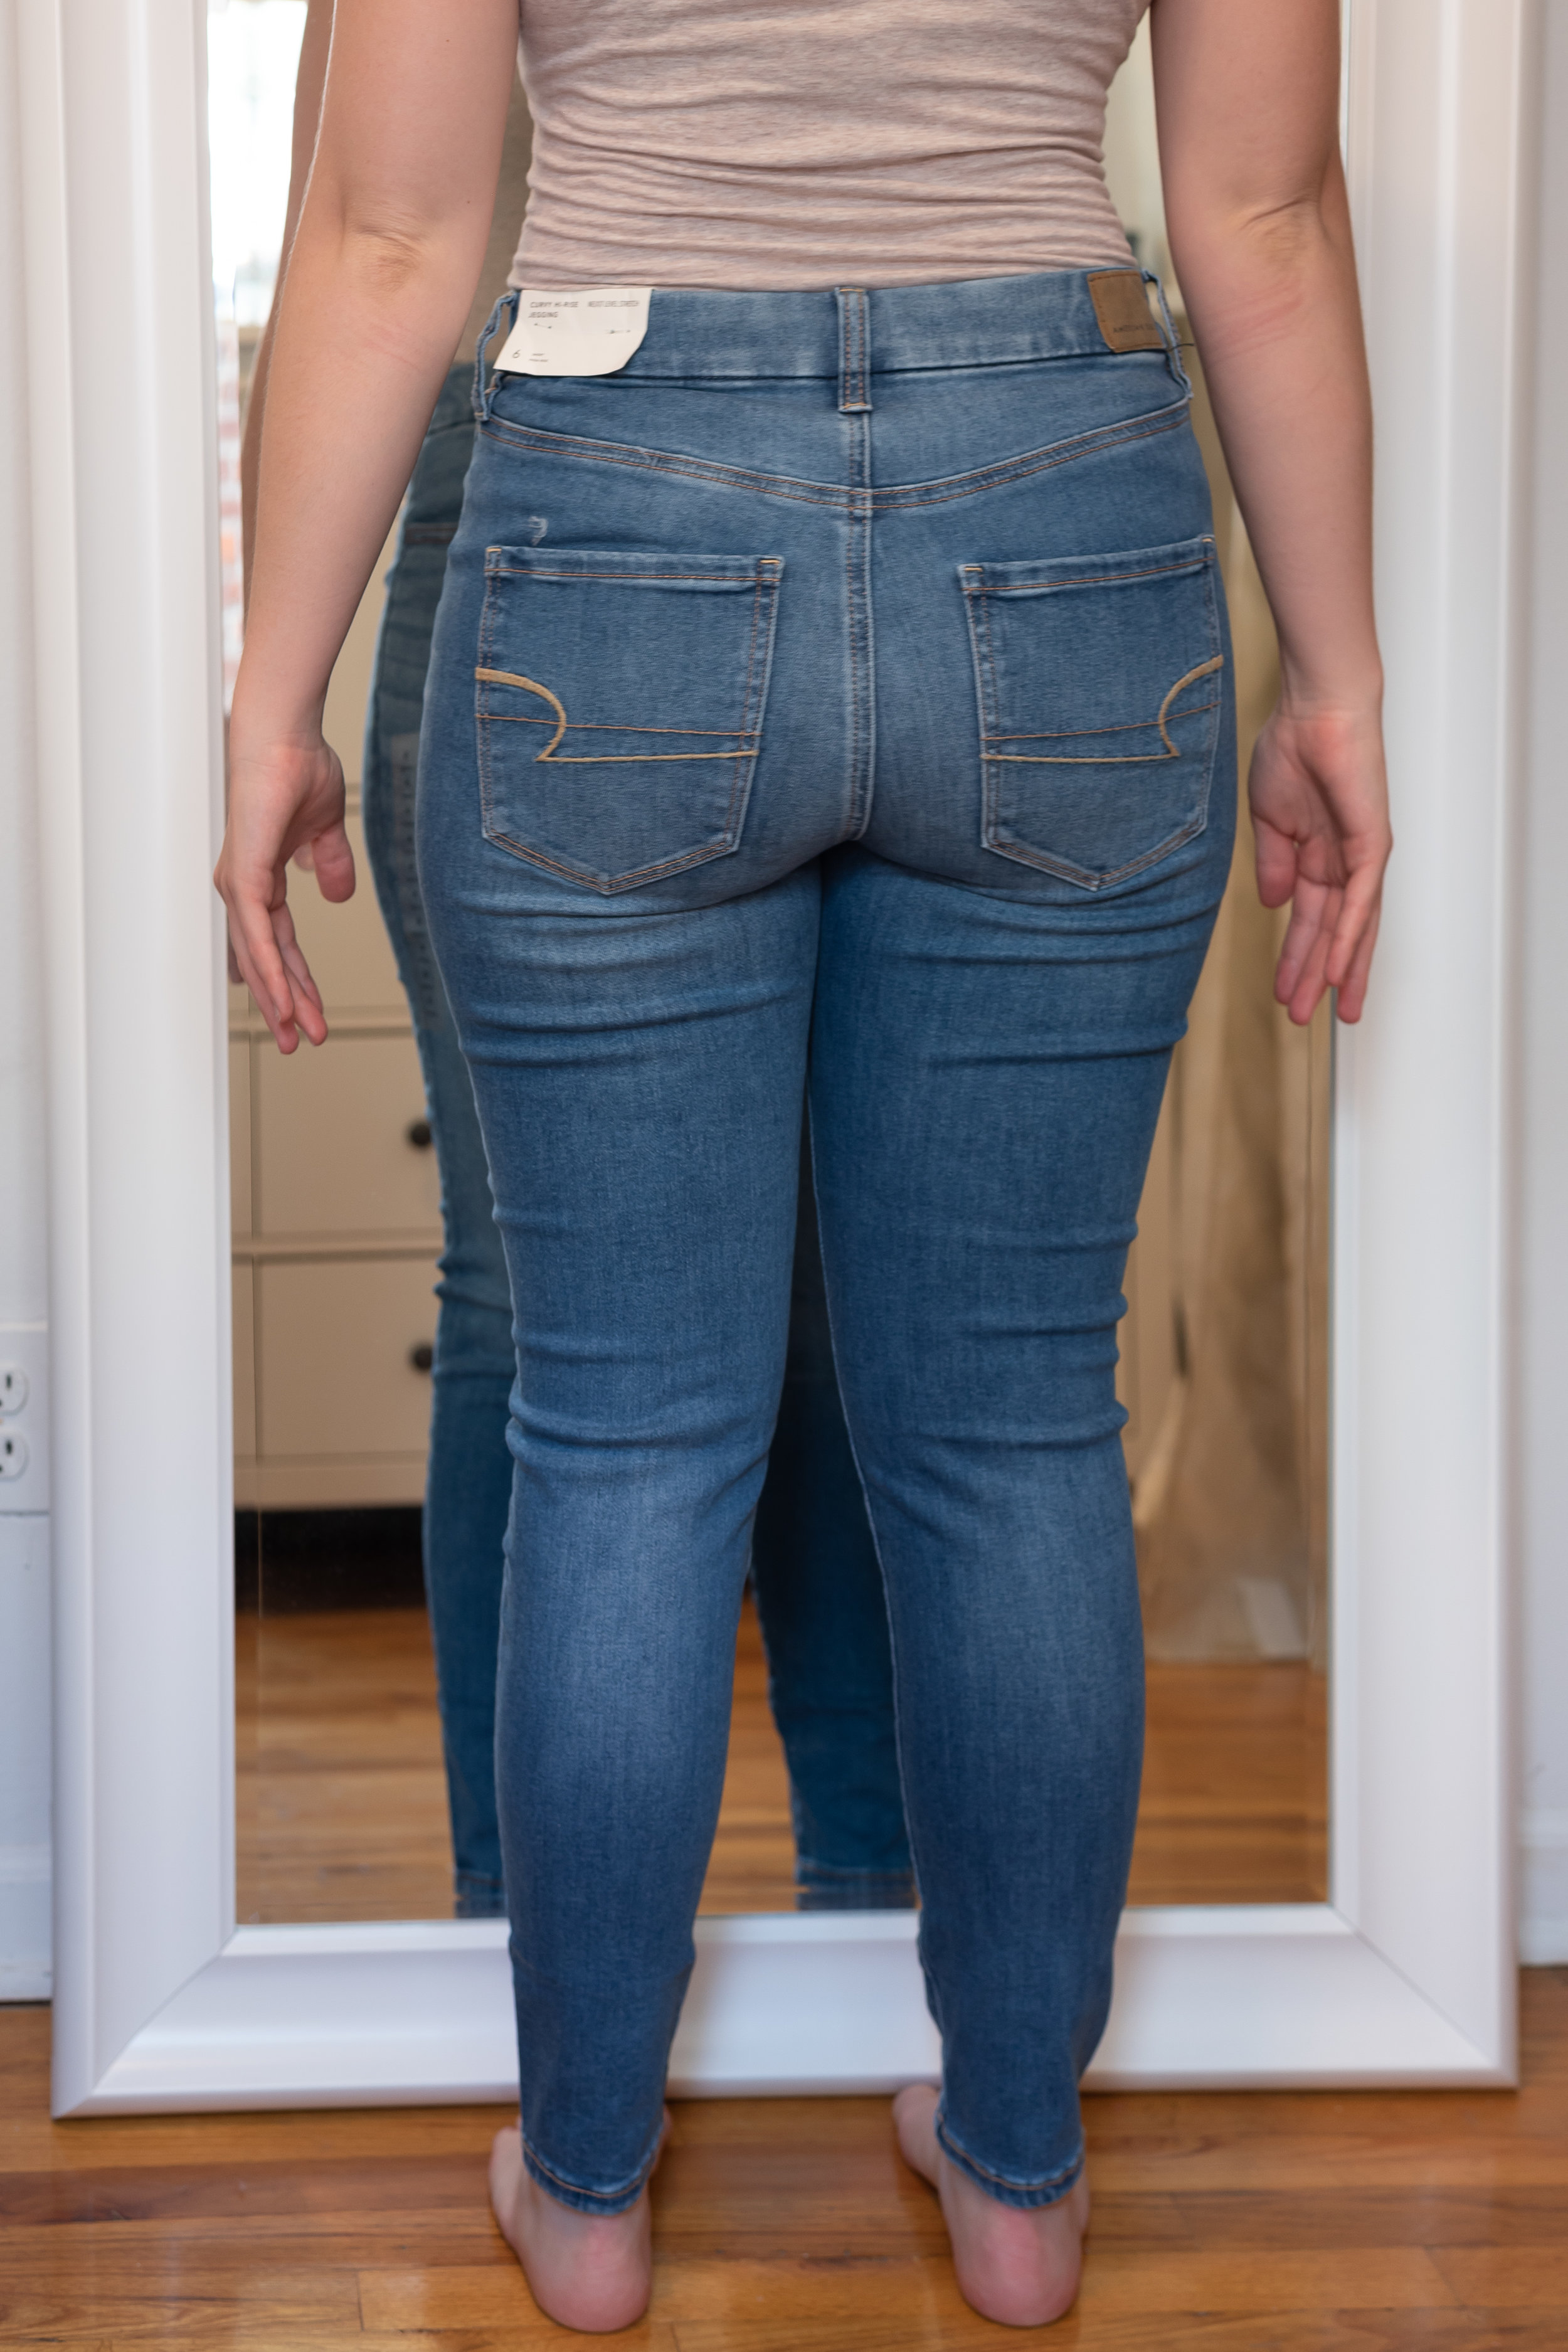 american eagle extra short jeans review